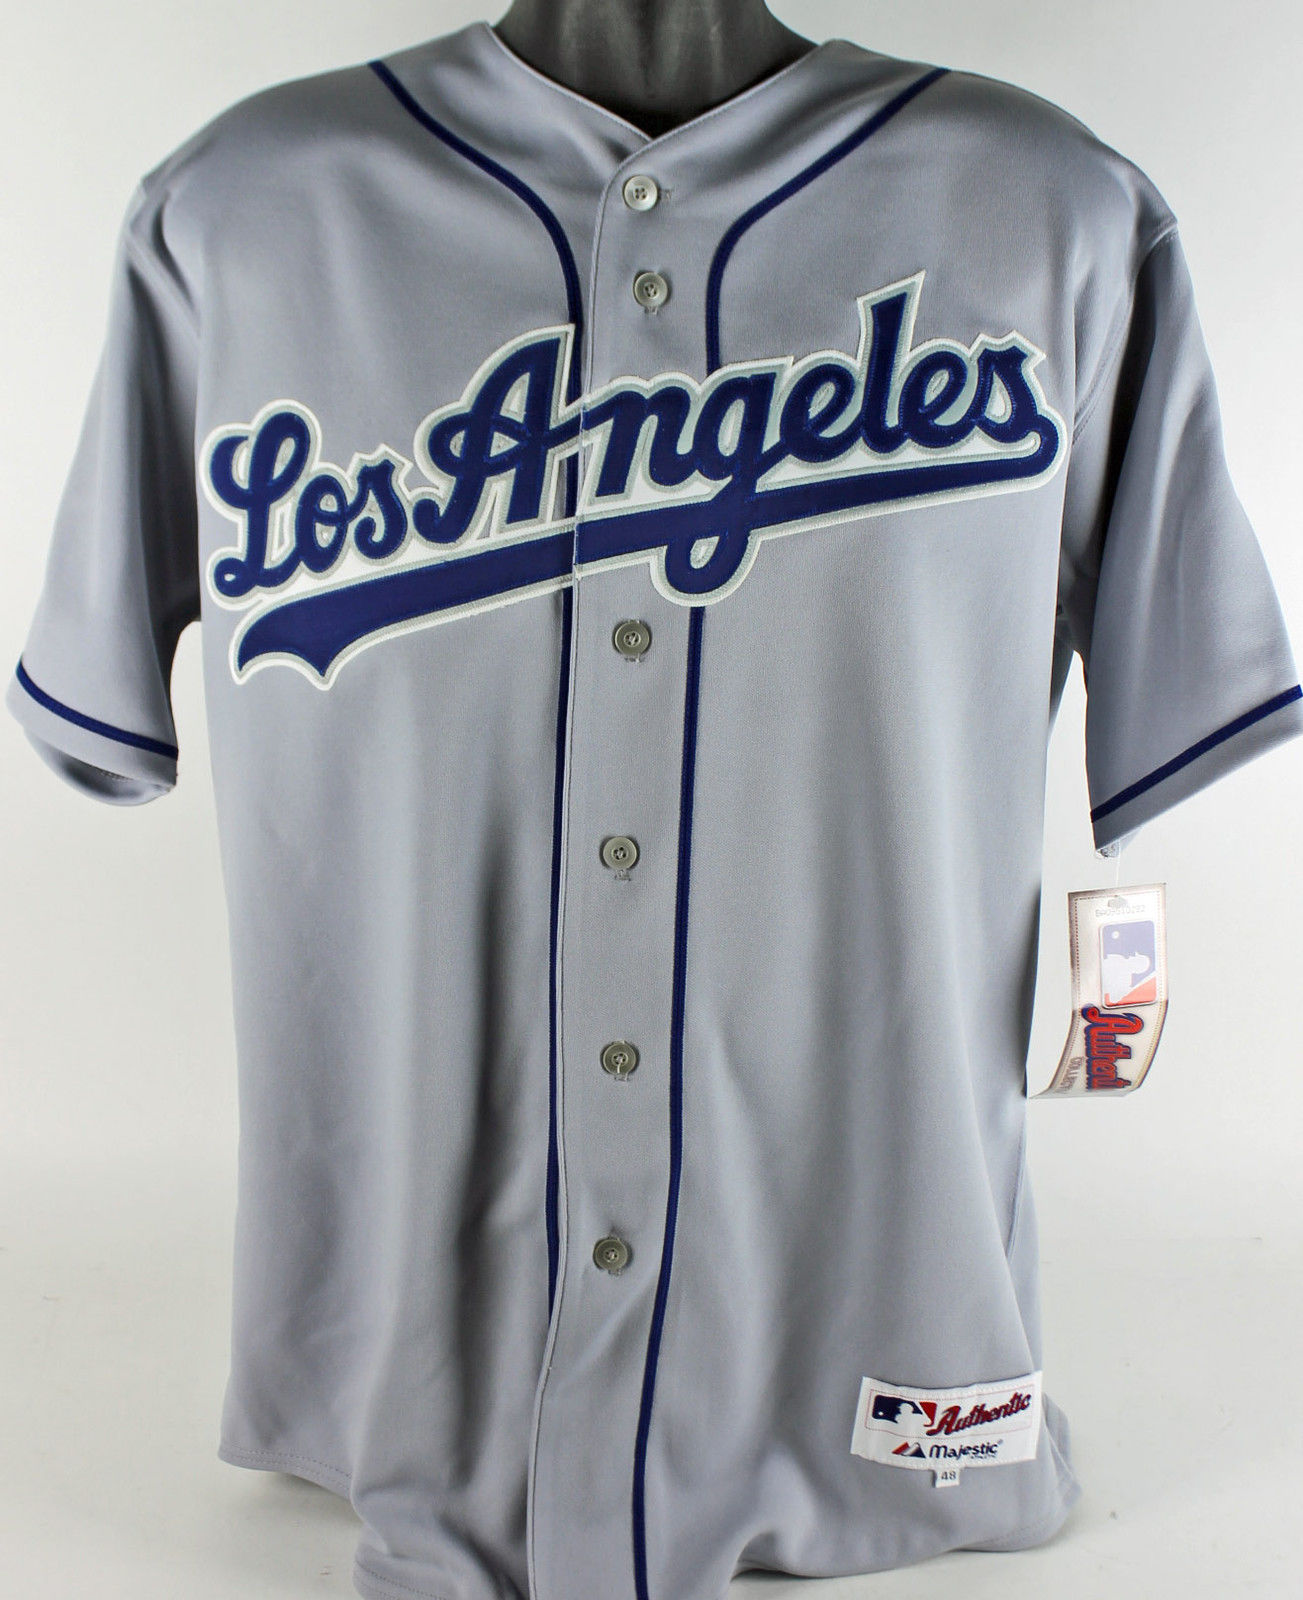 Vin Scully Signed Dodgers Authentic Majestic Jersey (Beckett COA)